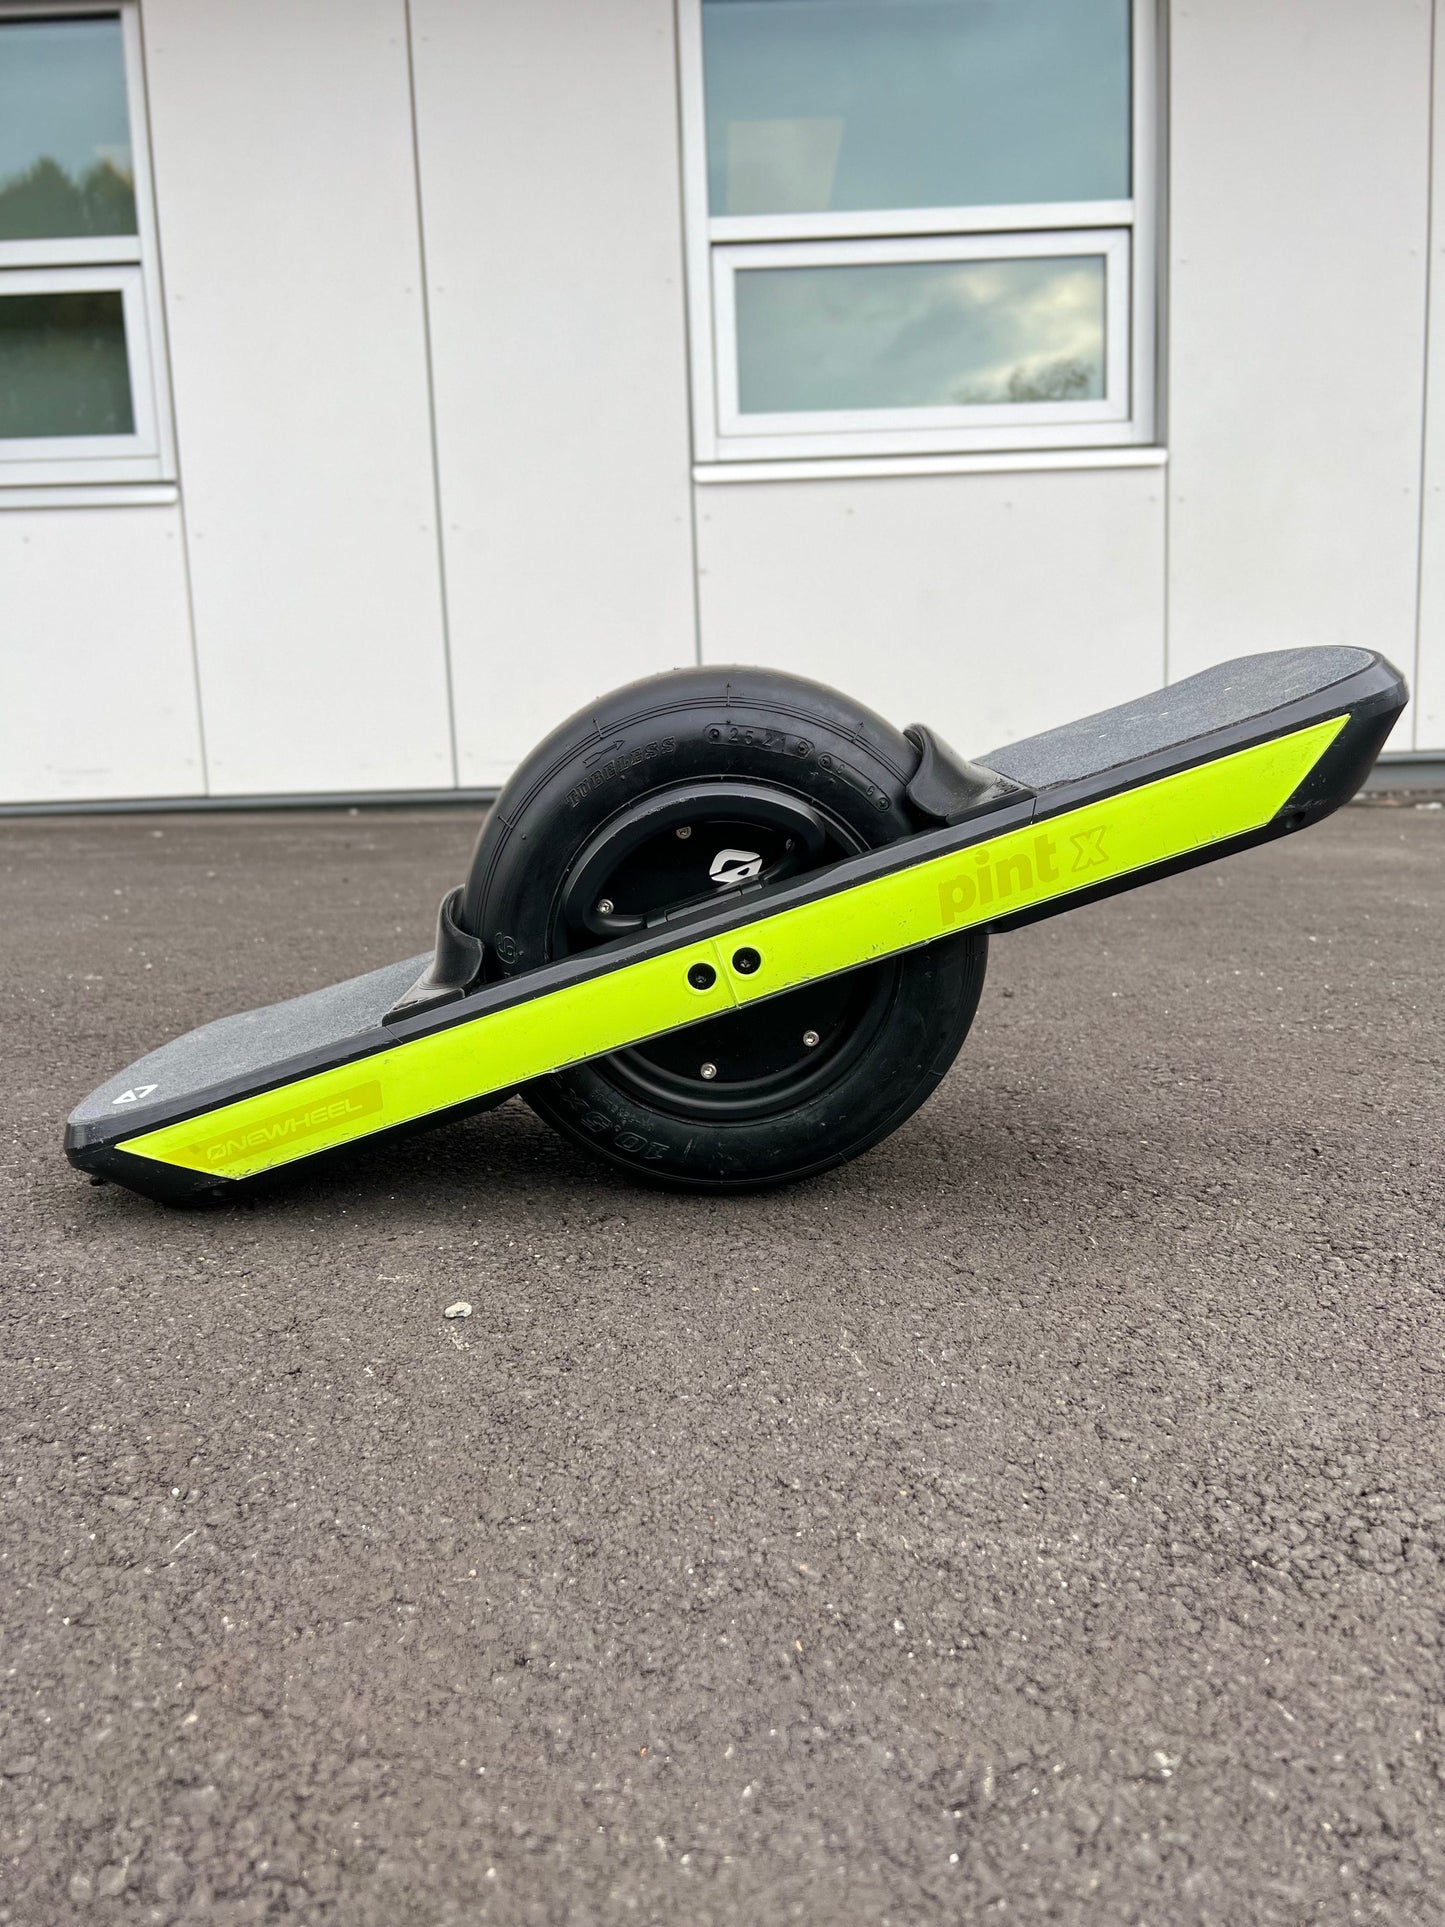 Roadster Fender for Onewheel Pint and Onewheel Pint X